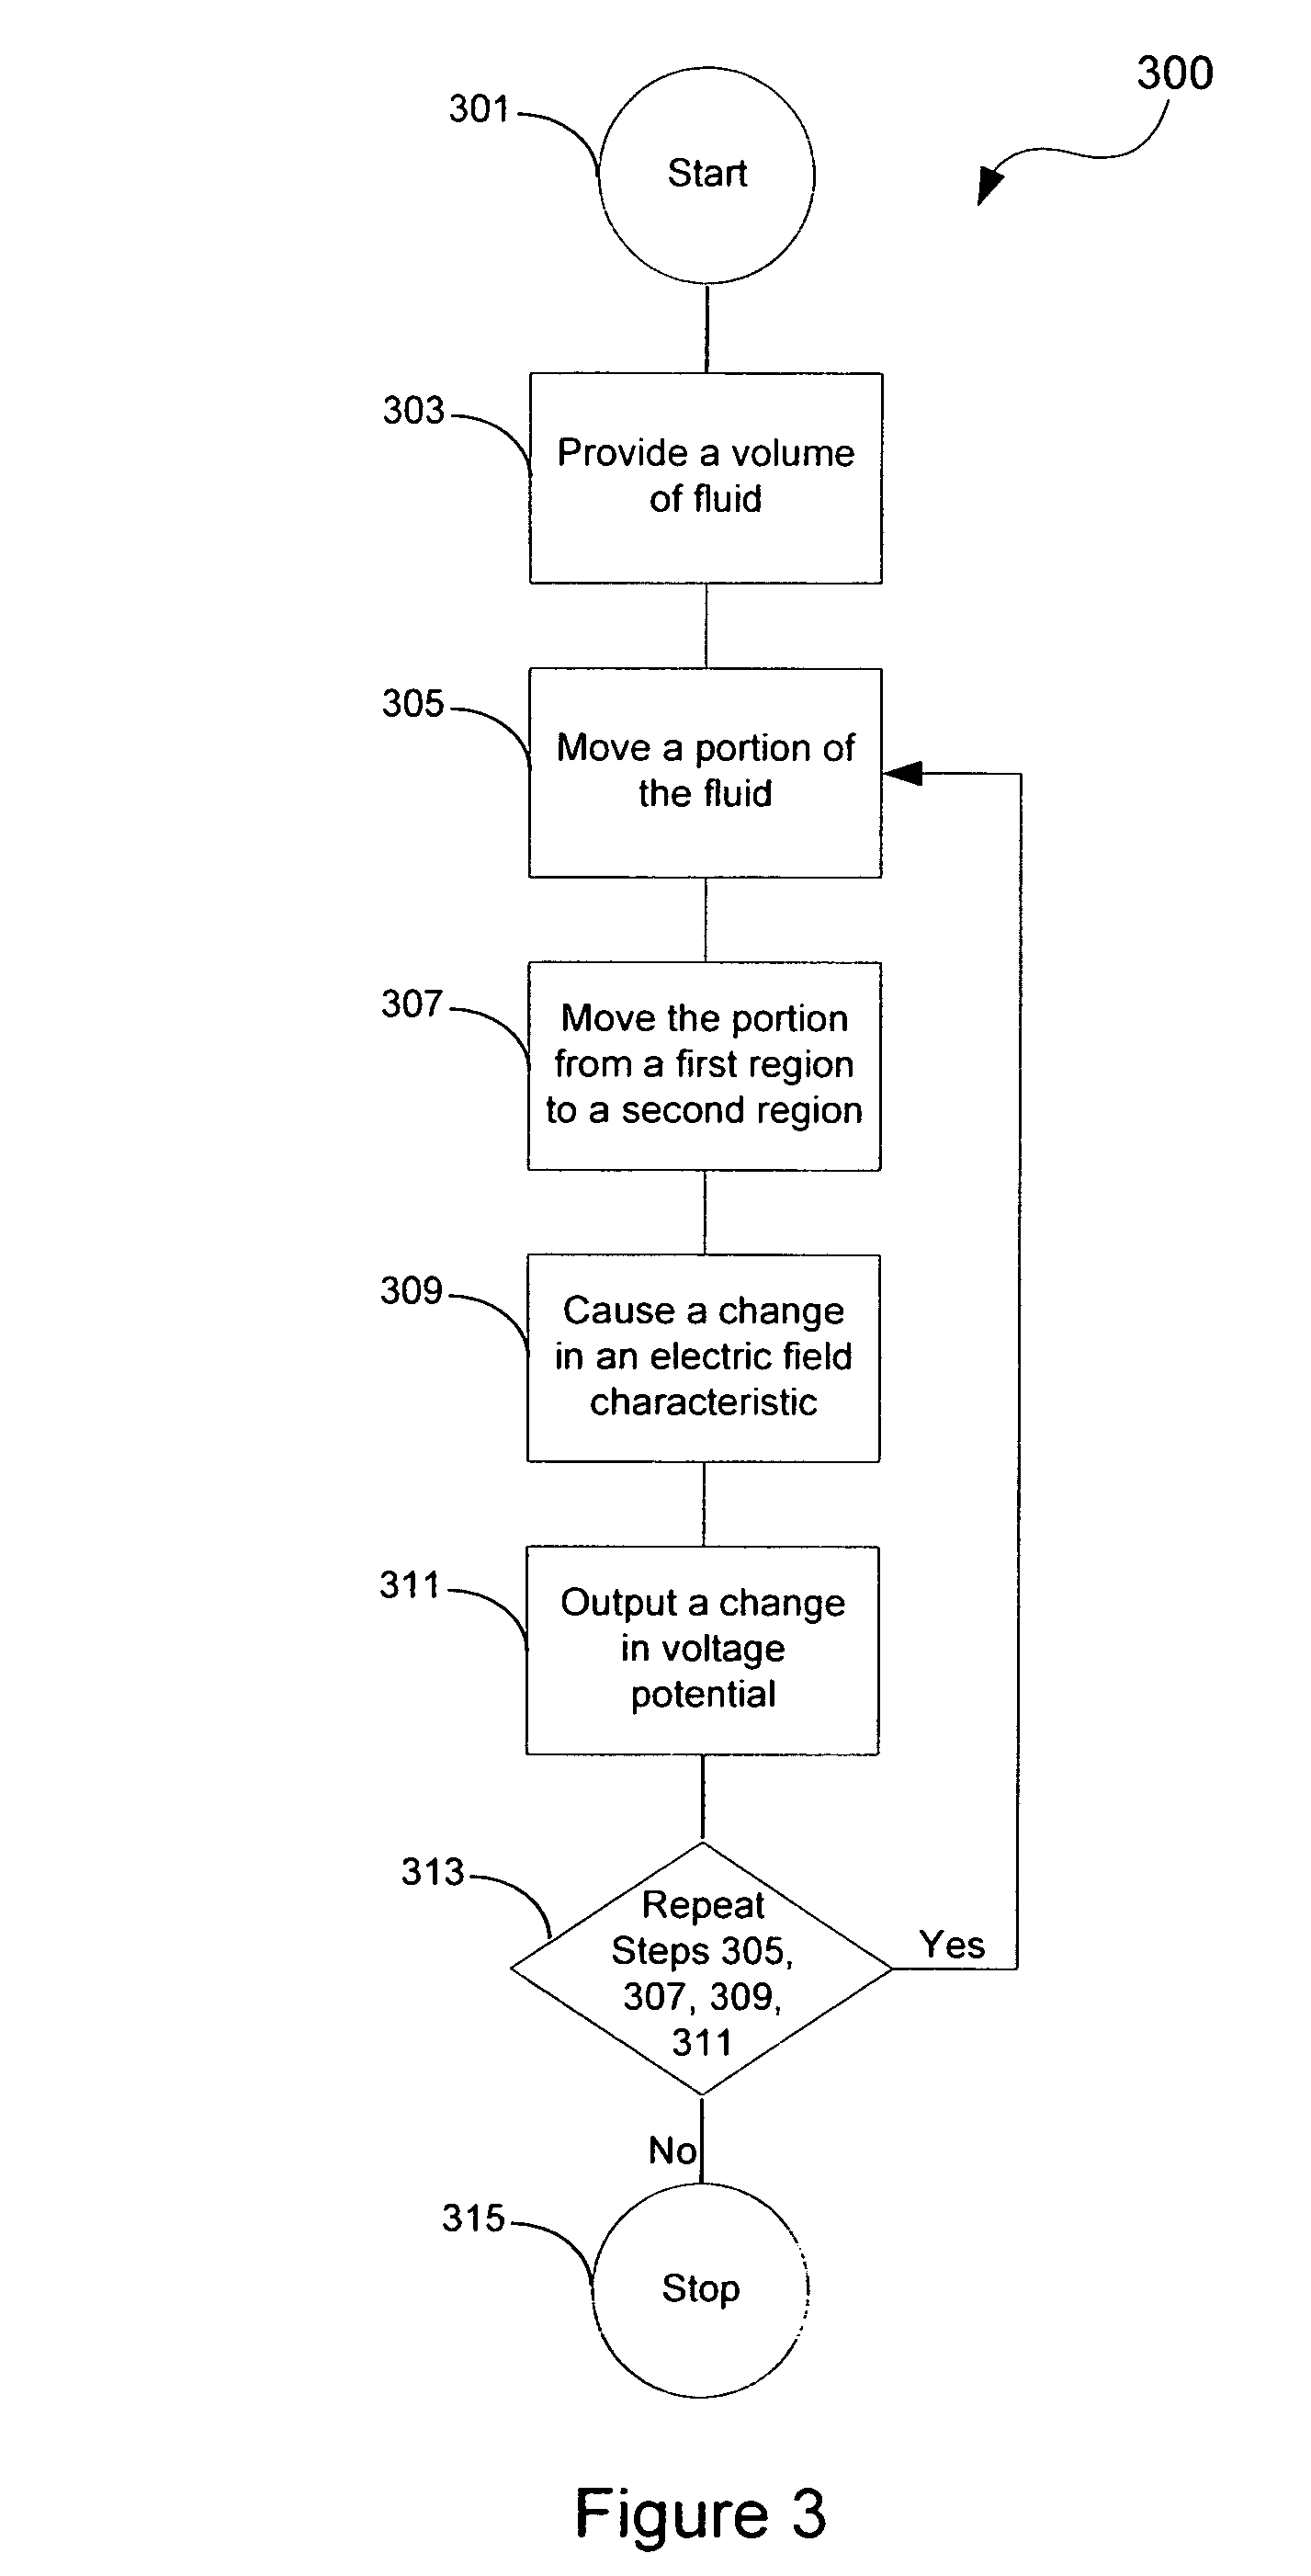 Method and system using liquid dielectric for electrostatic power generation